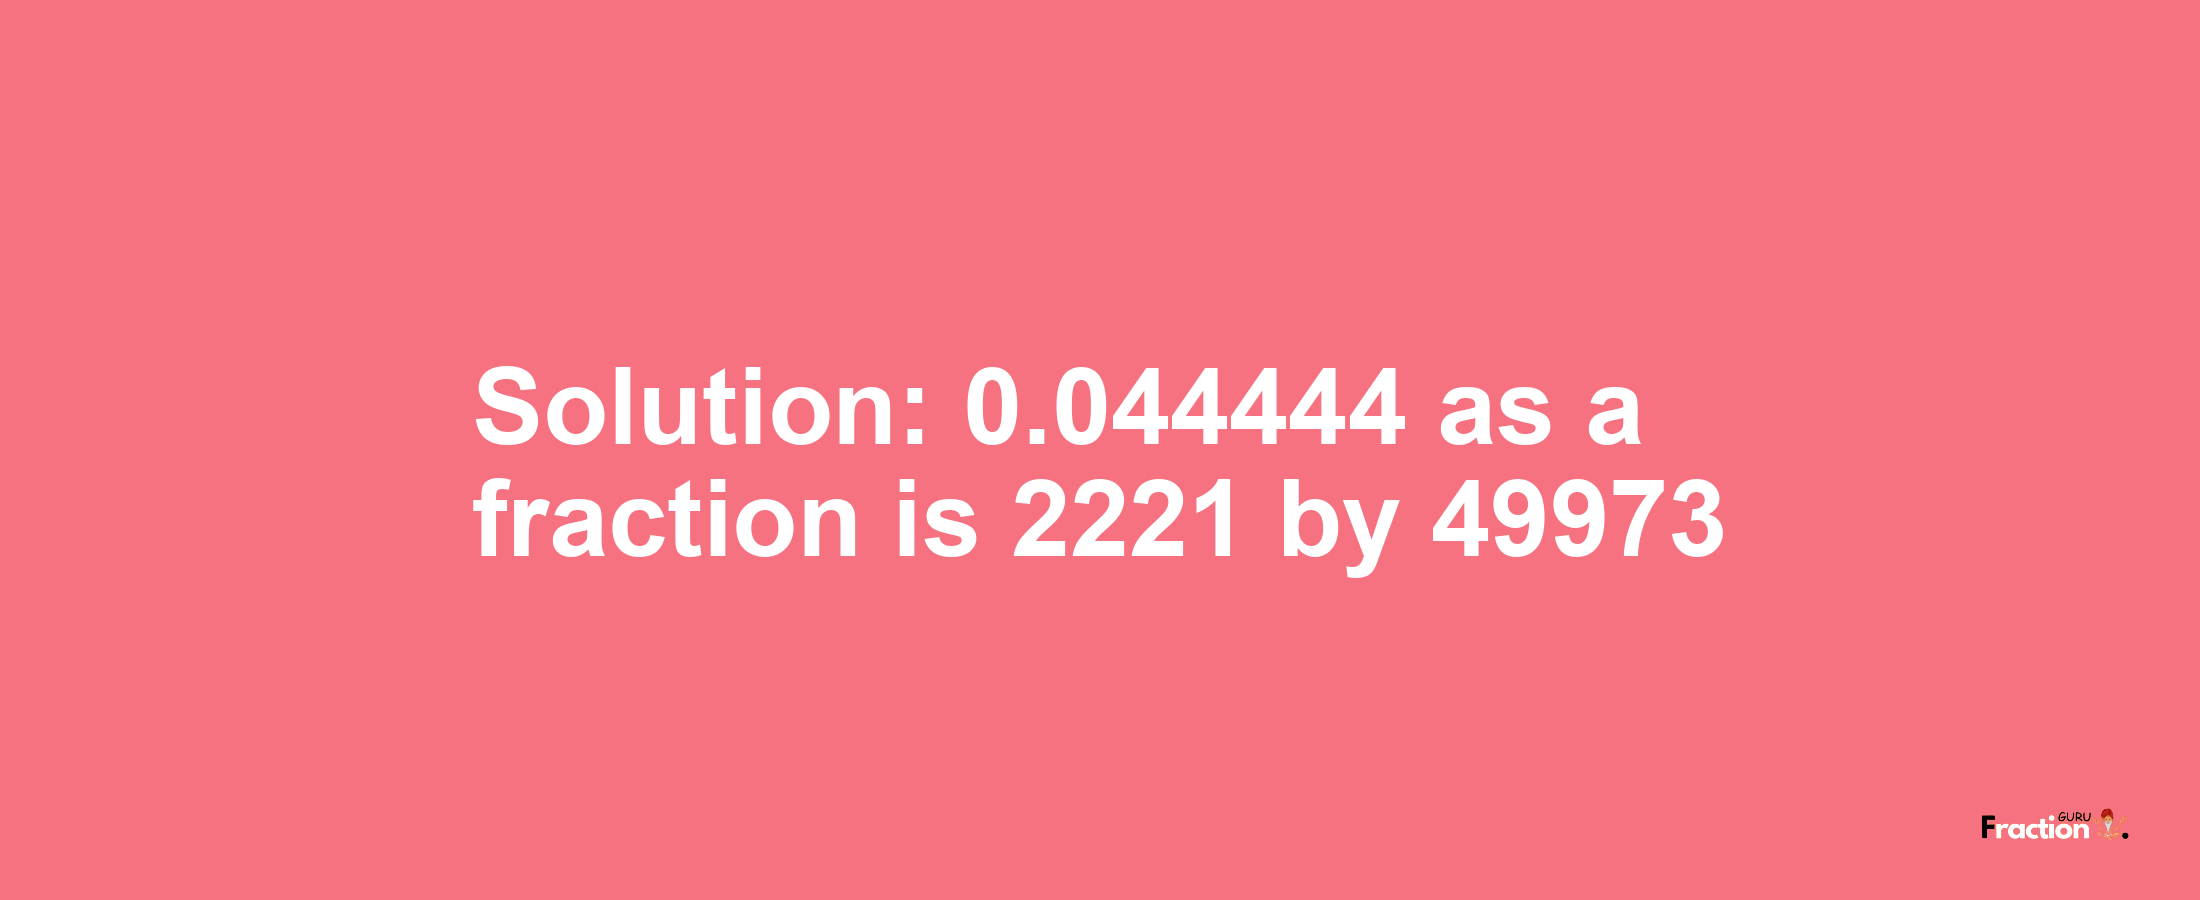 Solution:0.044444 as a fraction is 2221/49973